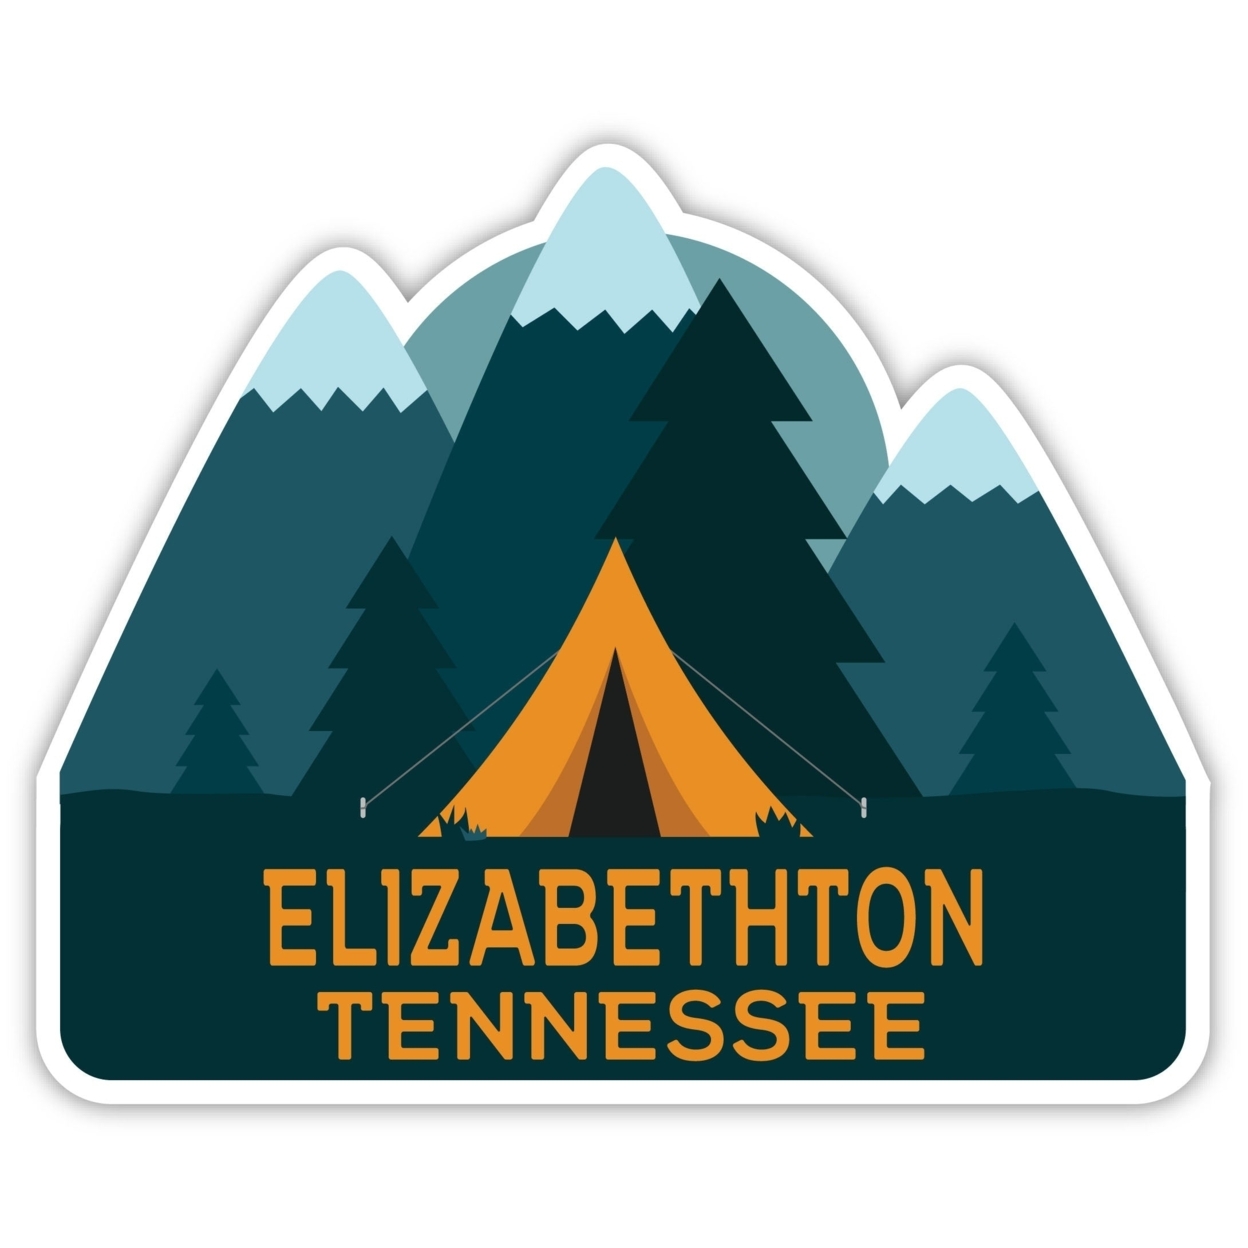 Elizabethton Tennessee Souvenir Decorative Stickers (Choose Theme And Size) - 4-Pack, 12-Inch, Tent